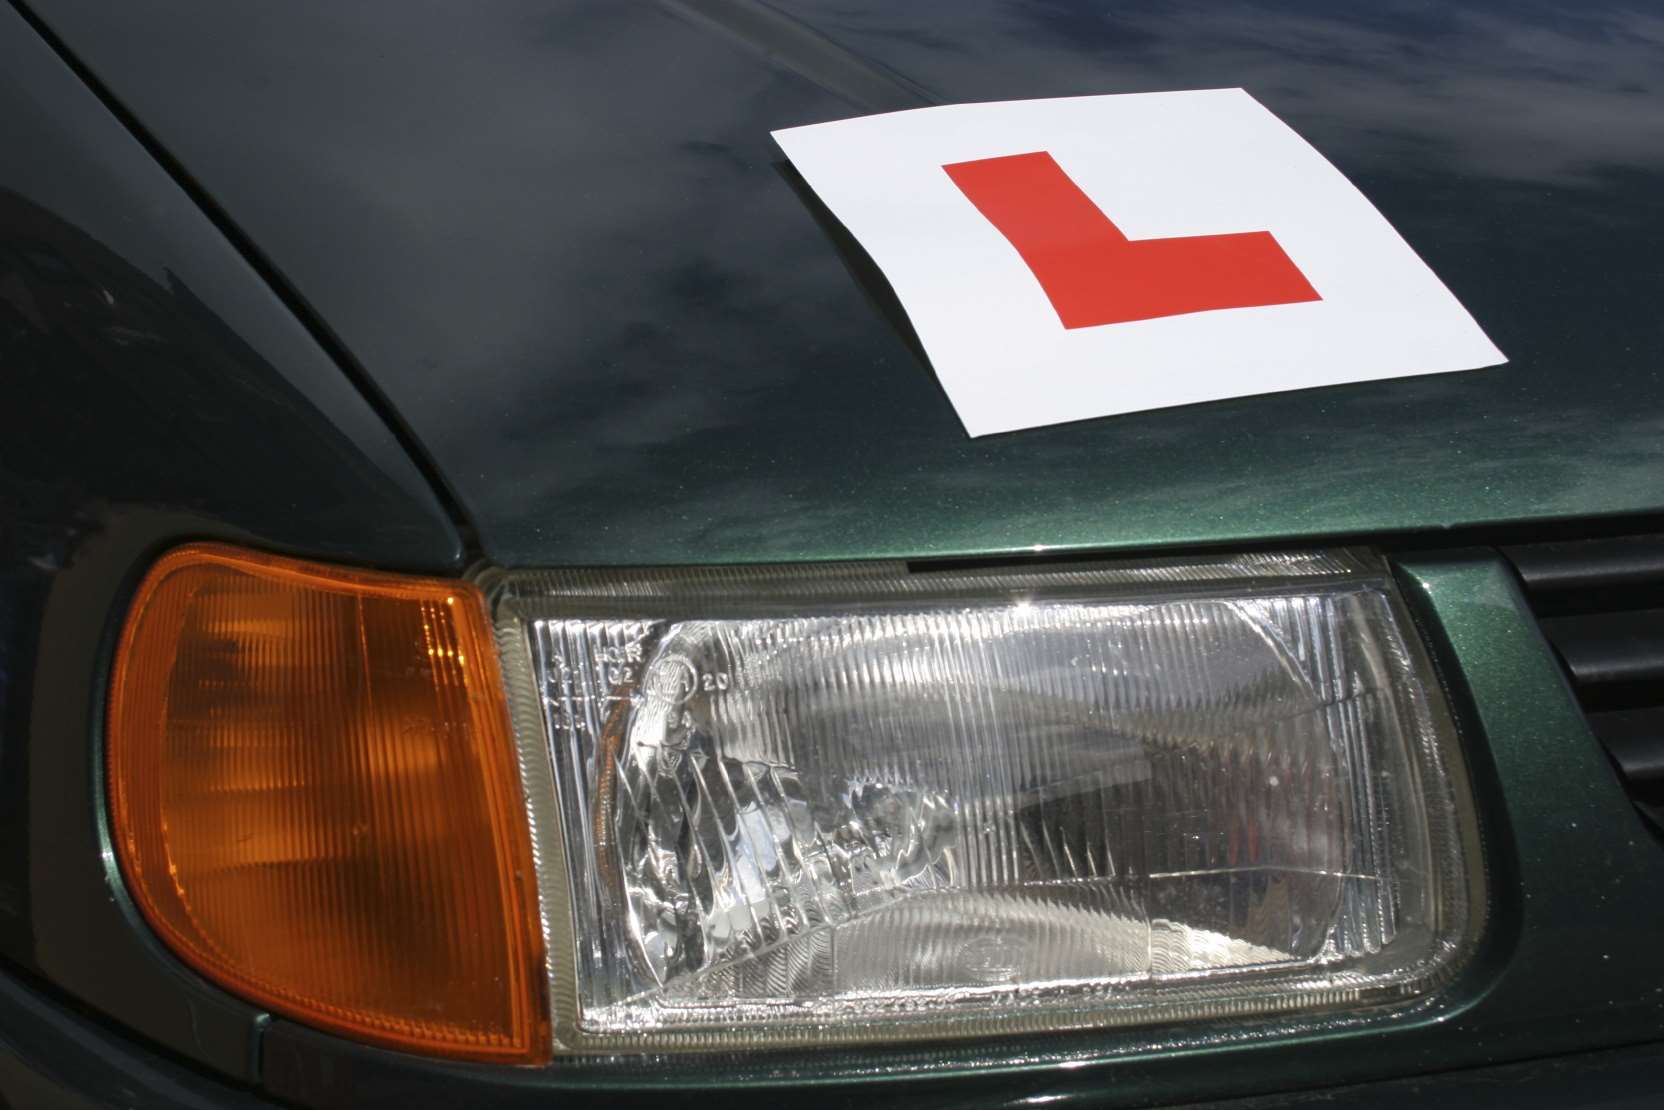 Cloke was not a qualified driving instructor. Stock image.